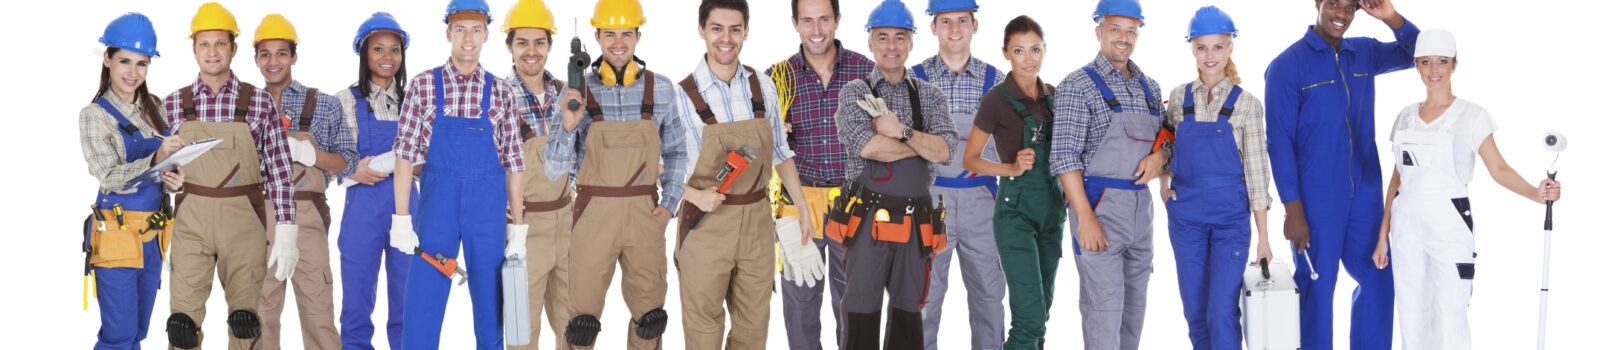 Skilled Trades Virtual Information Sessions